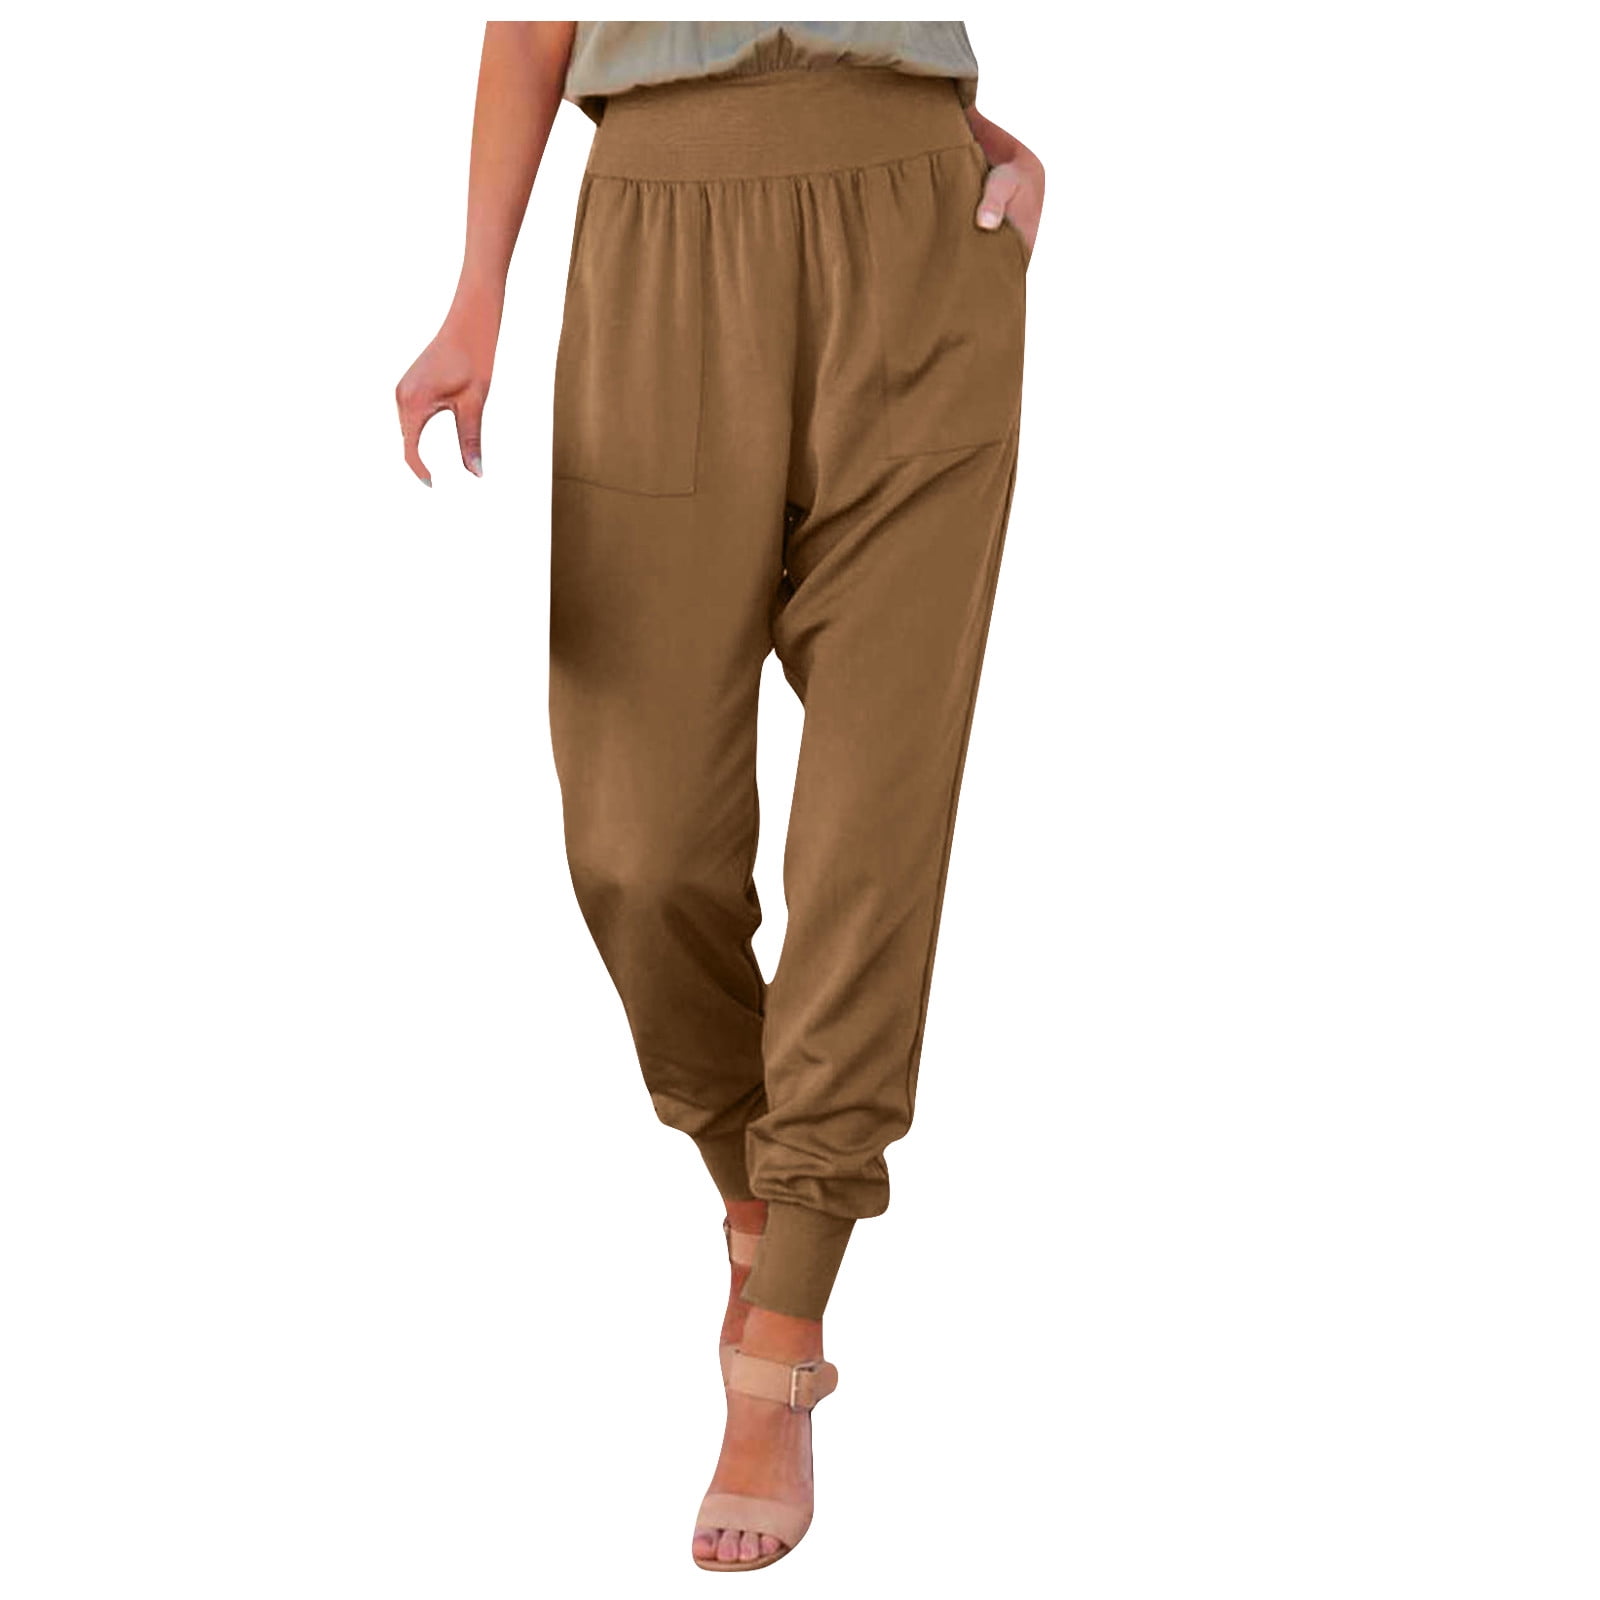 Winter Savings! RQYYD Women's Sweatpants with Pocket, Women Active